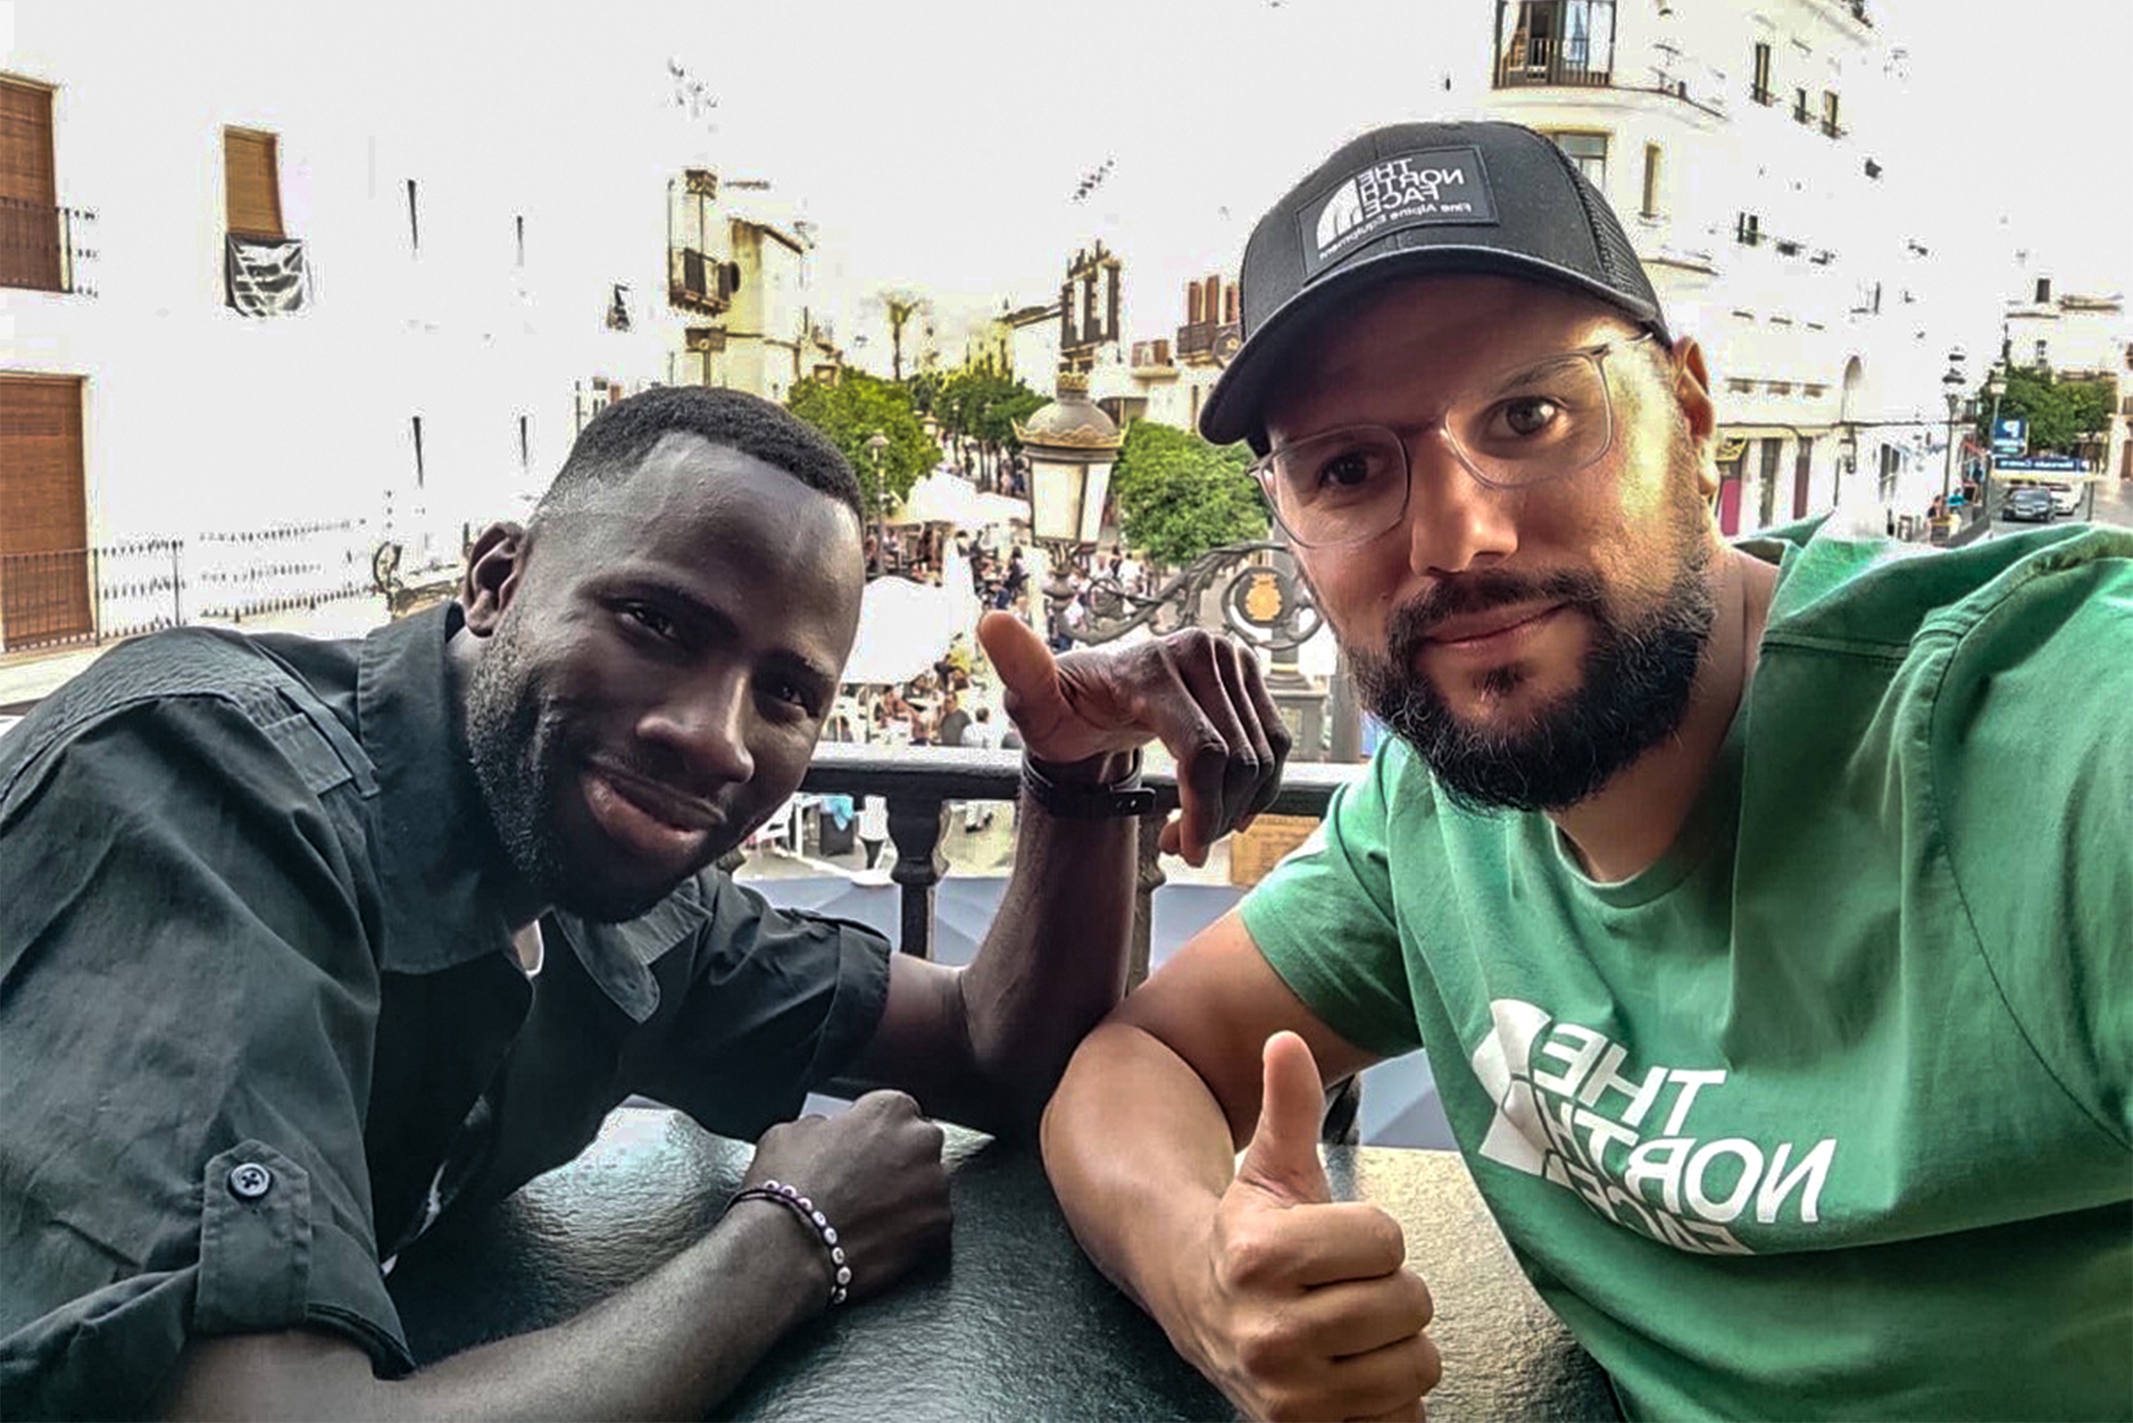 Spanish man in a green North Face shirt taking a selfie with an African man wearing a black shirt